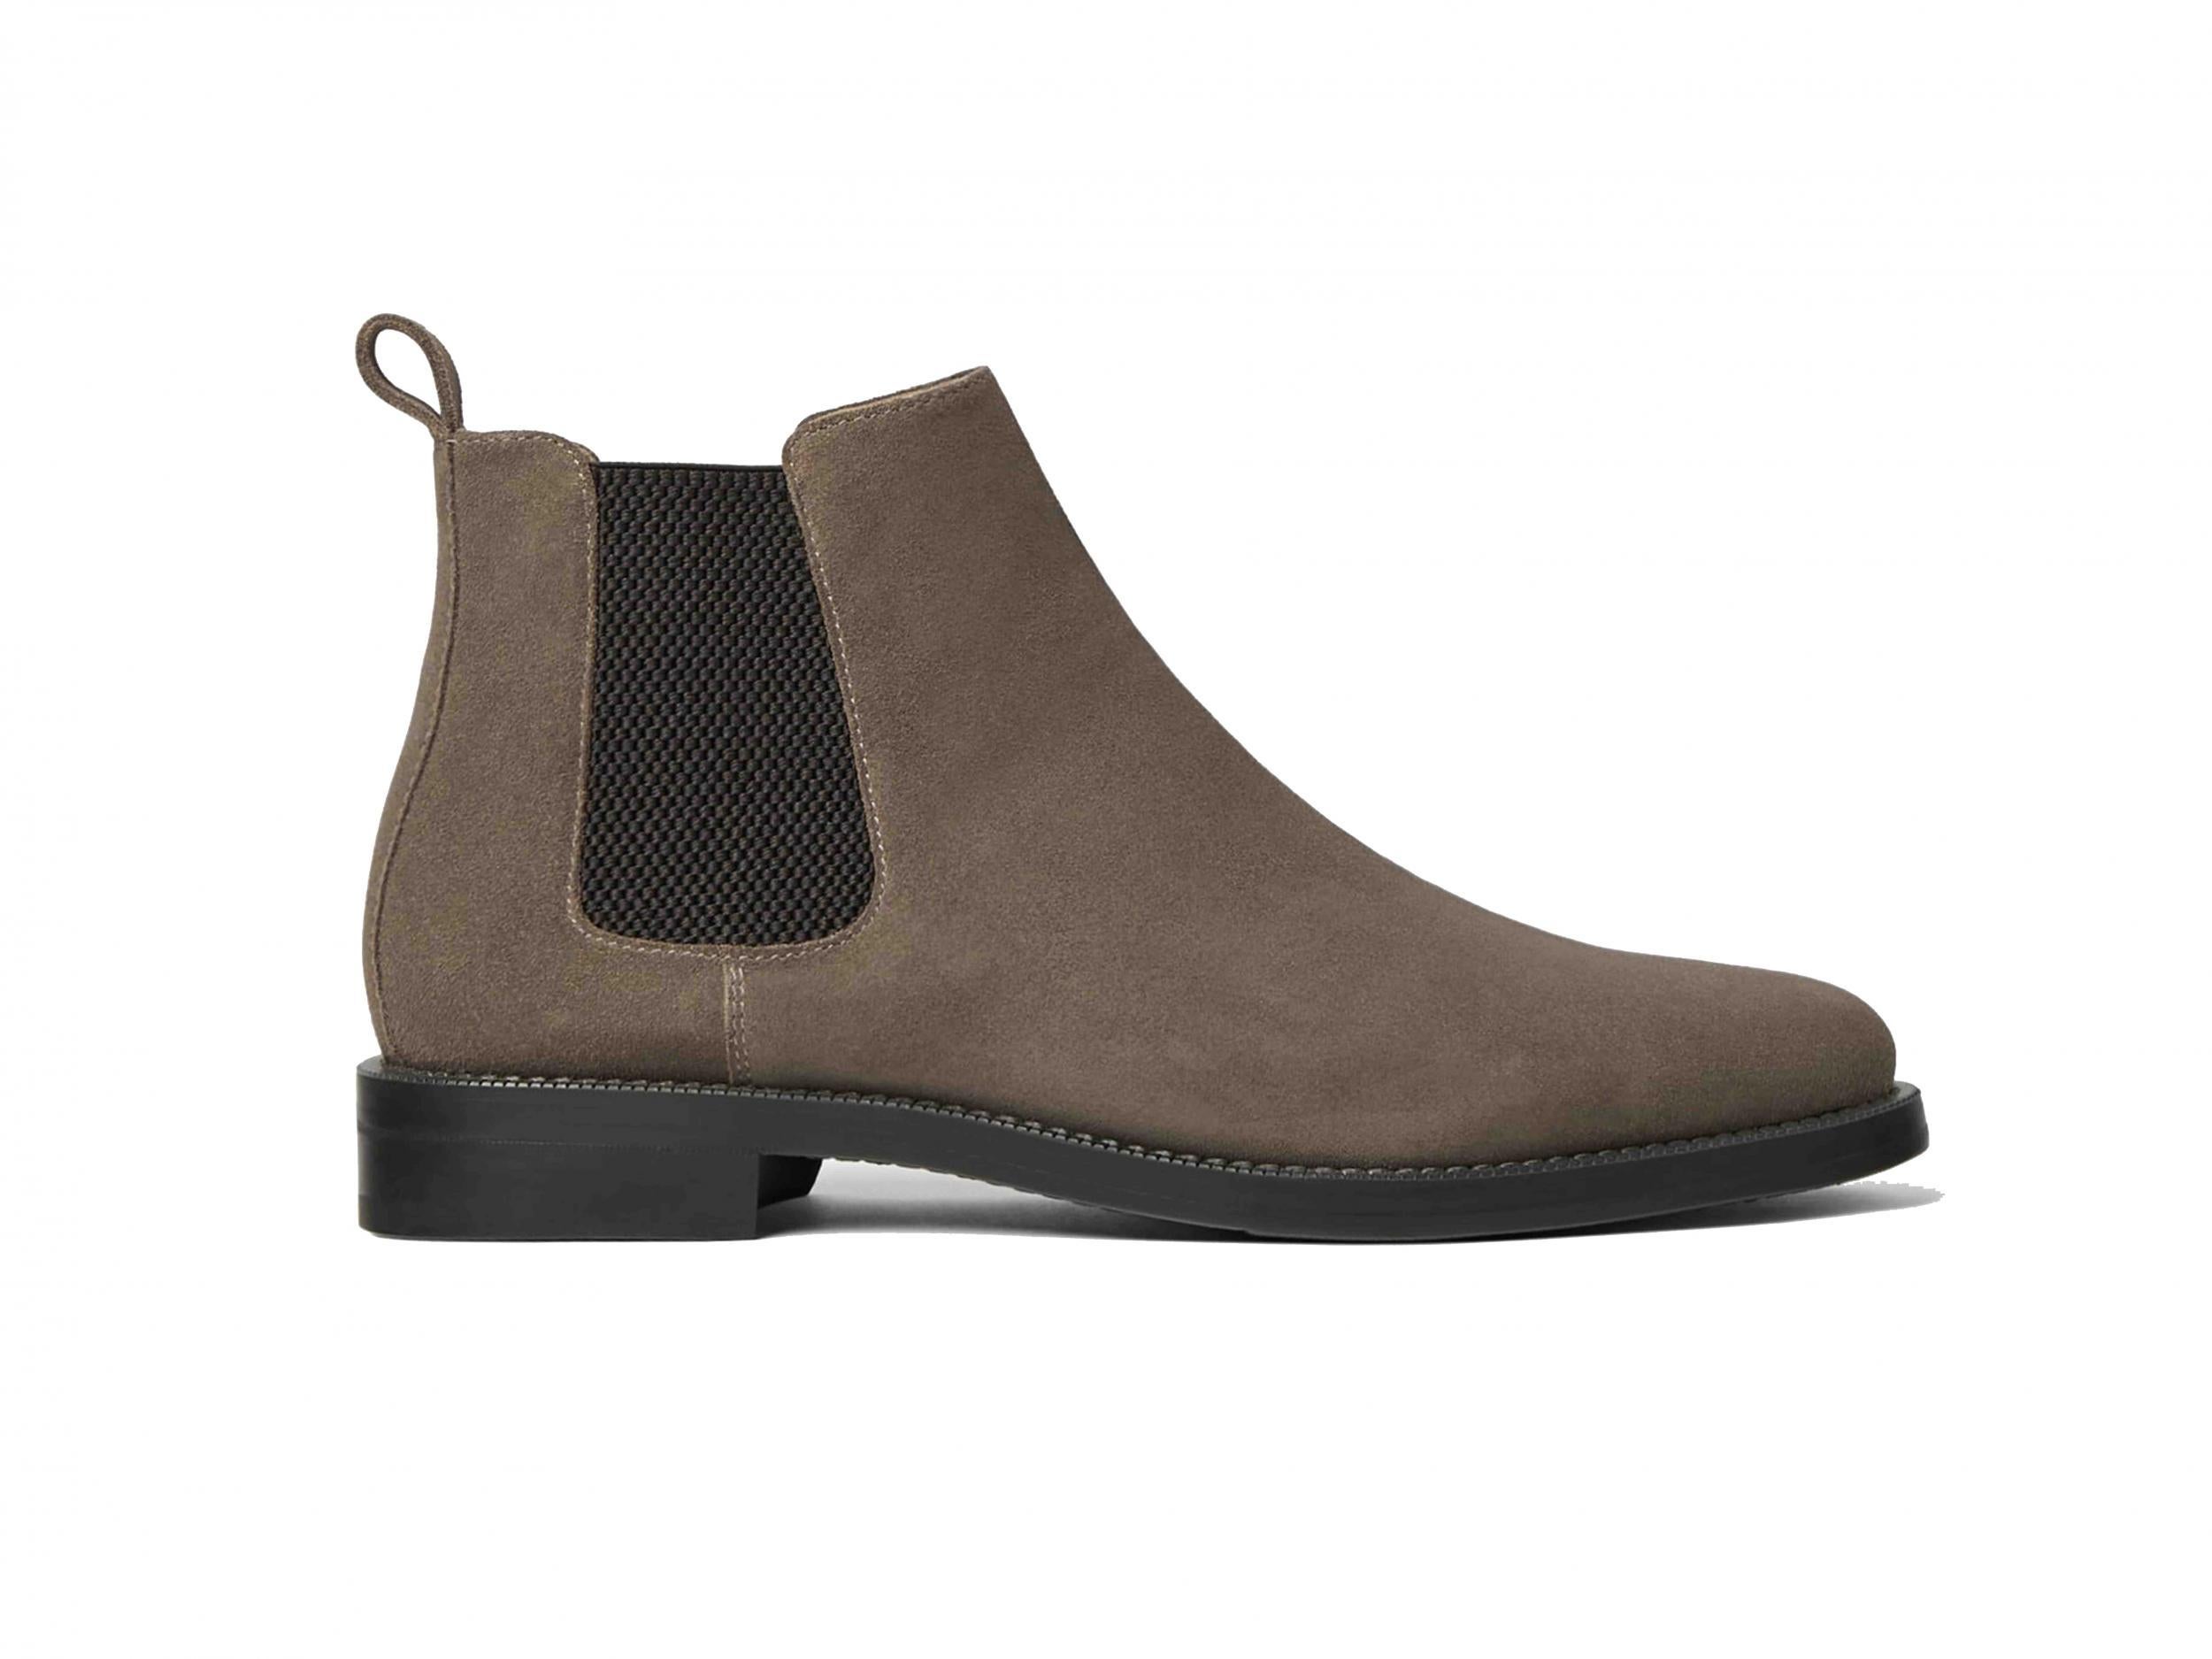 mens grey leather boots uk